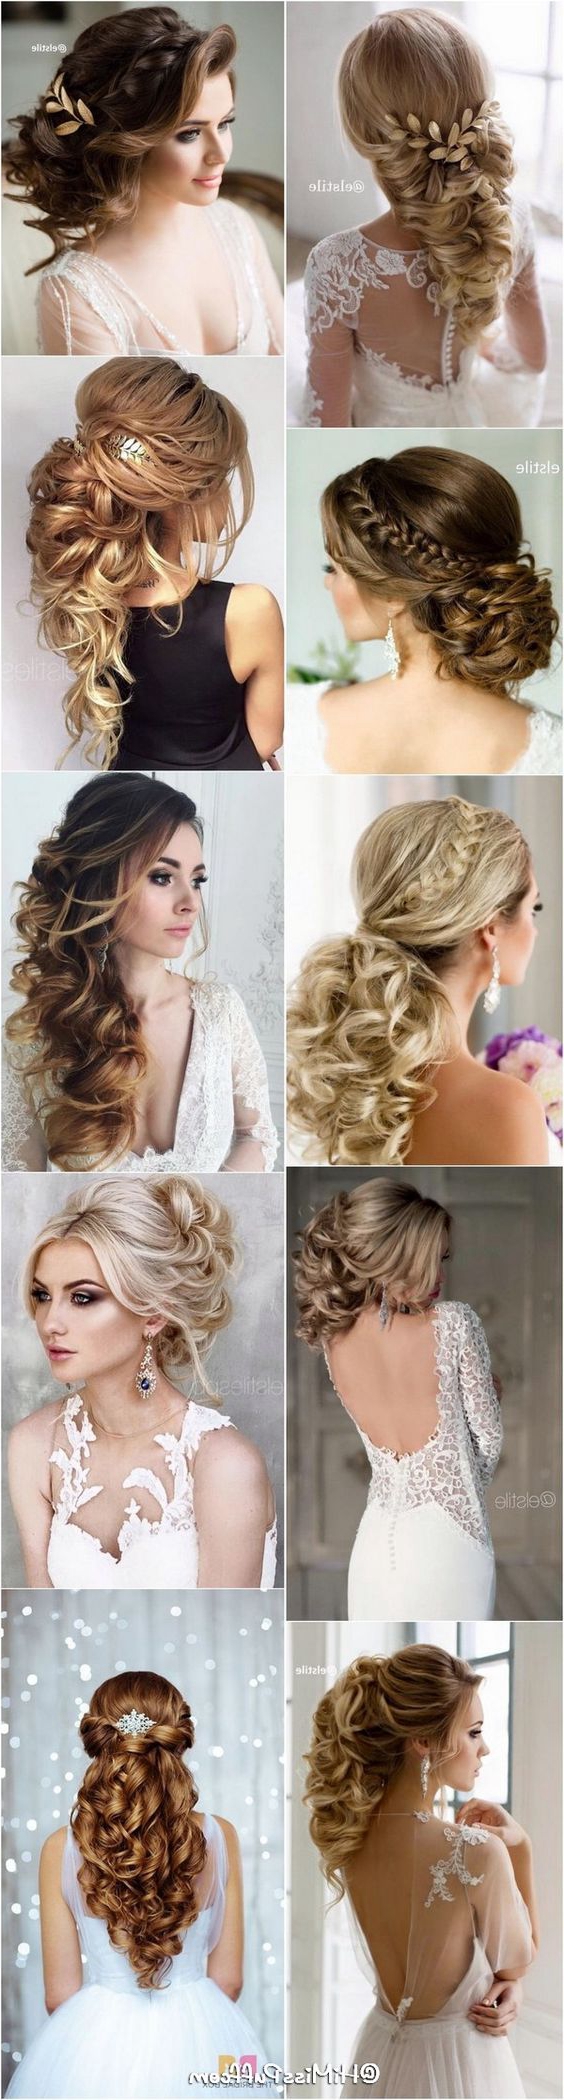 bridal-wedding-hairstyles-for-long-hair-that-will-inspire